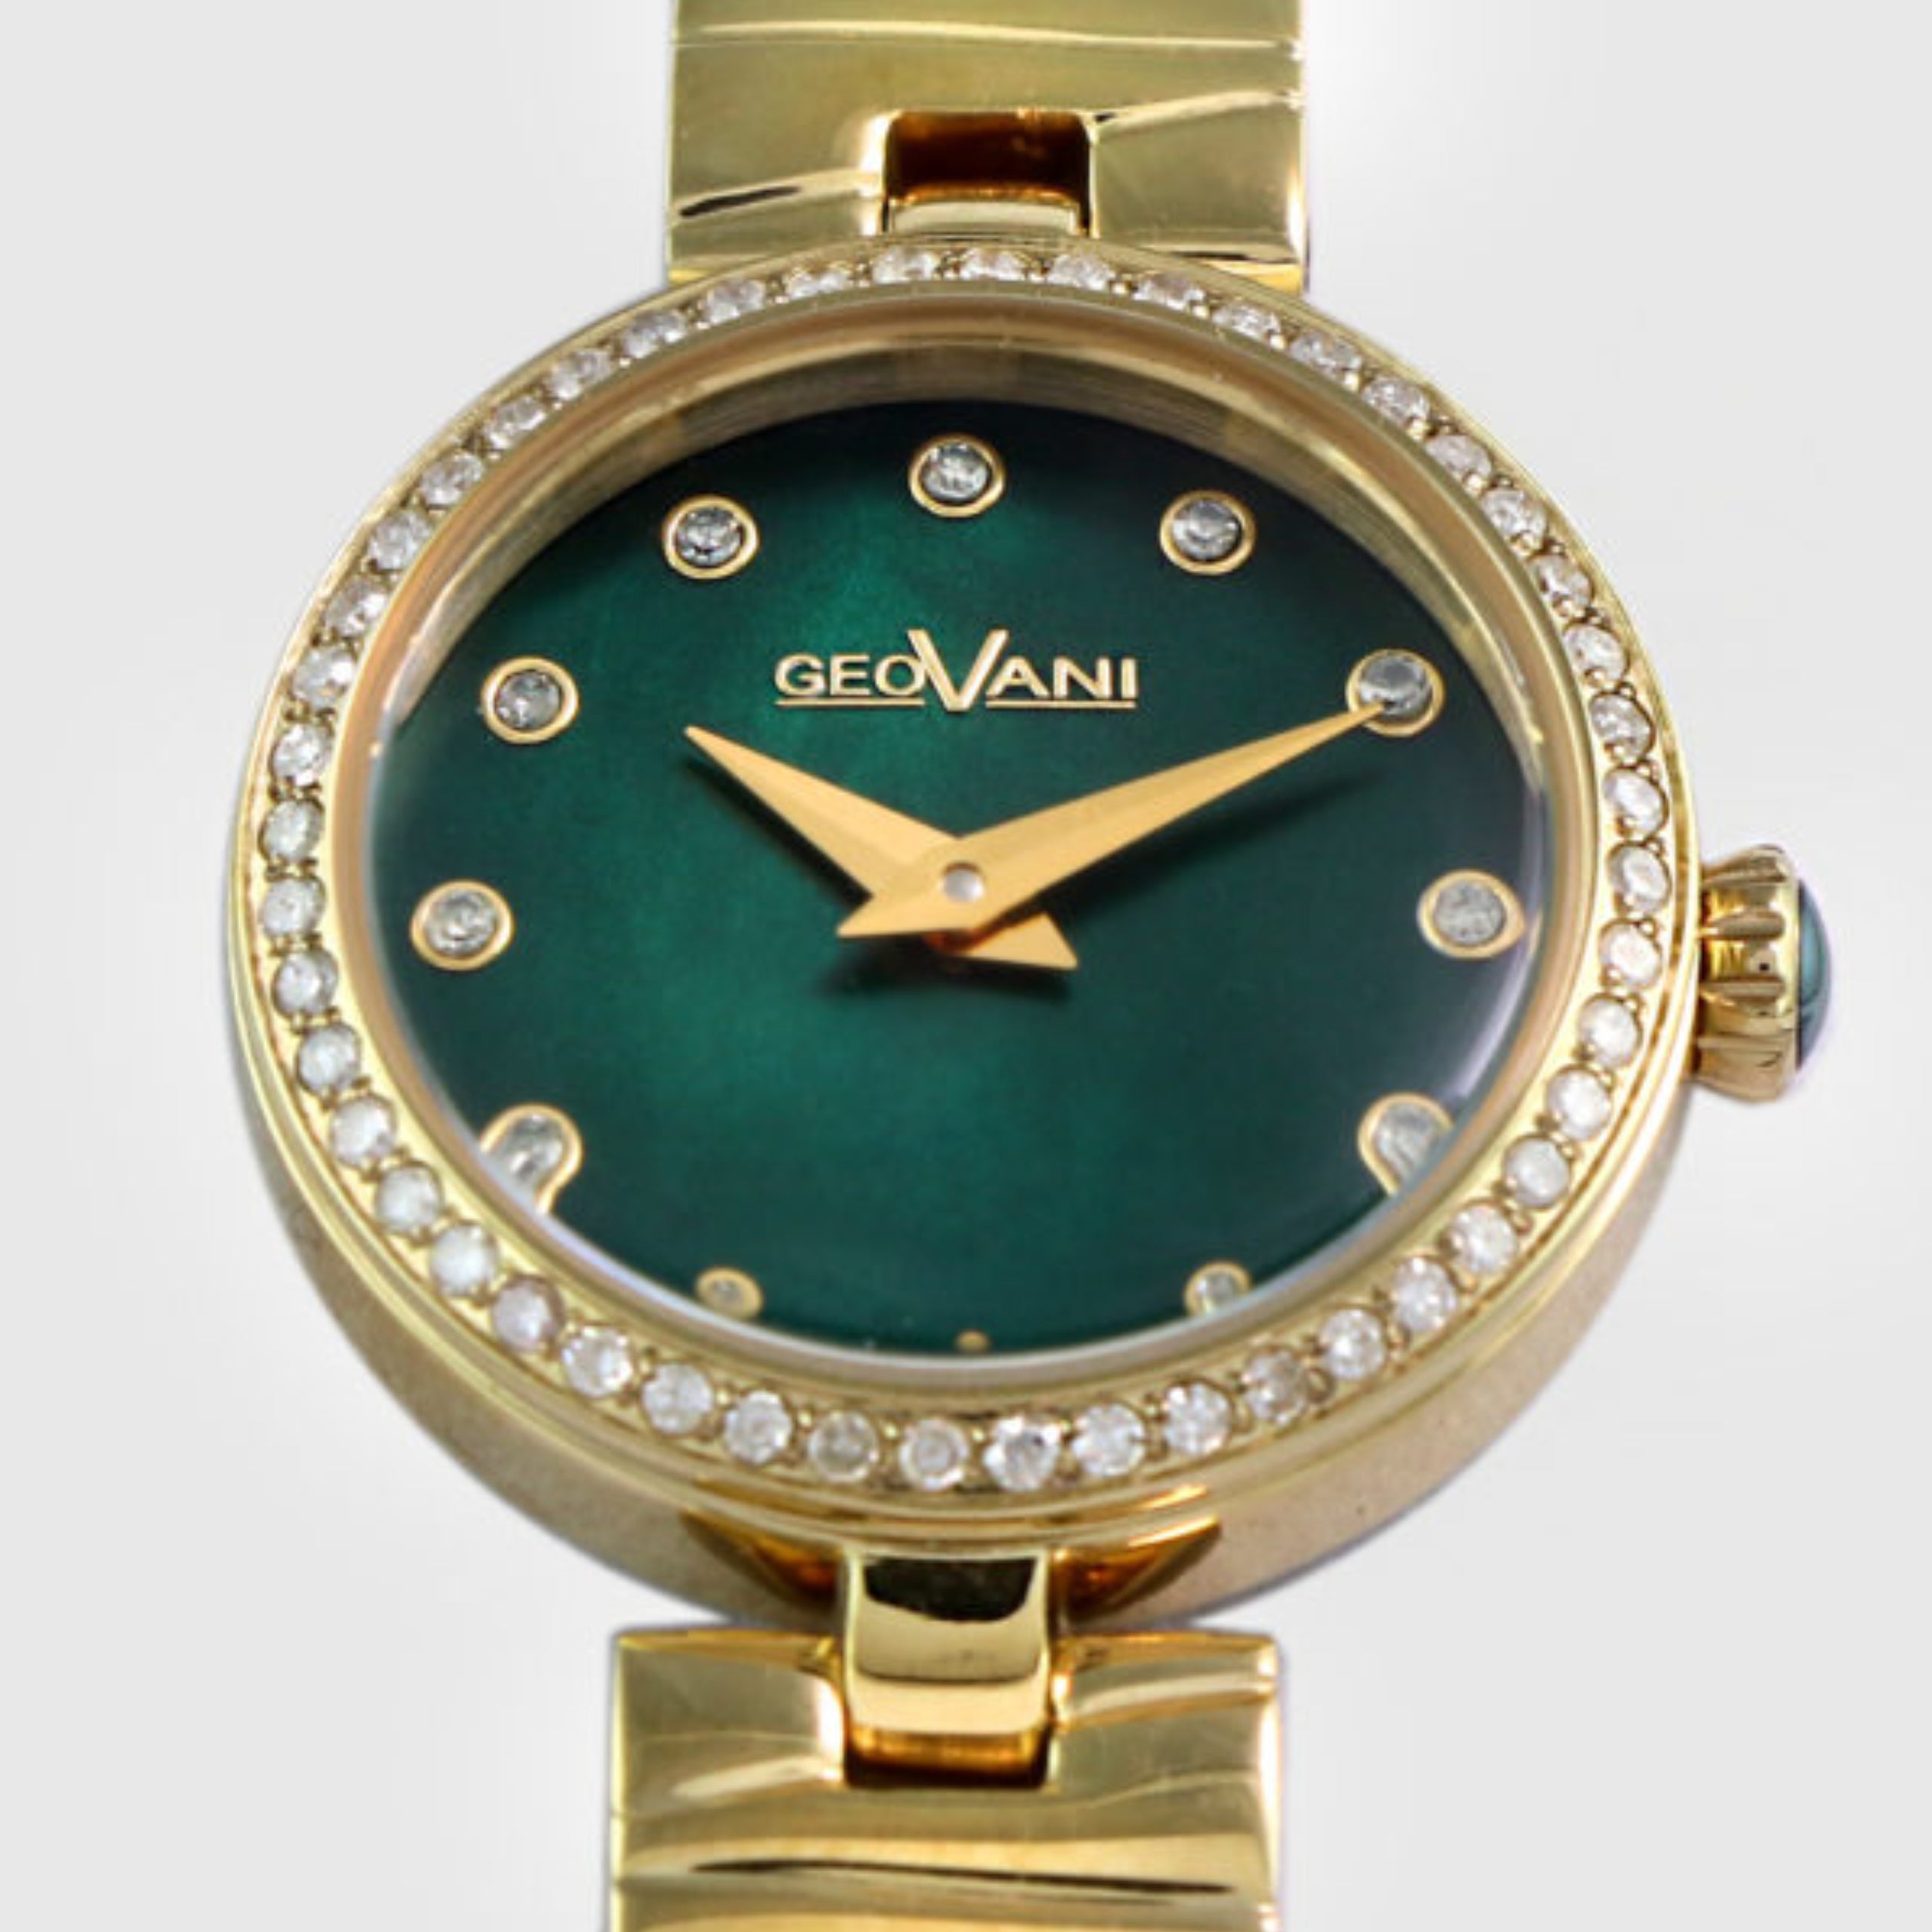 Giovanni Women's Swiss Quartz Watch with Pearly Green Dial - GEO-0003